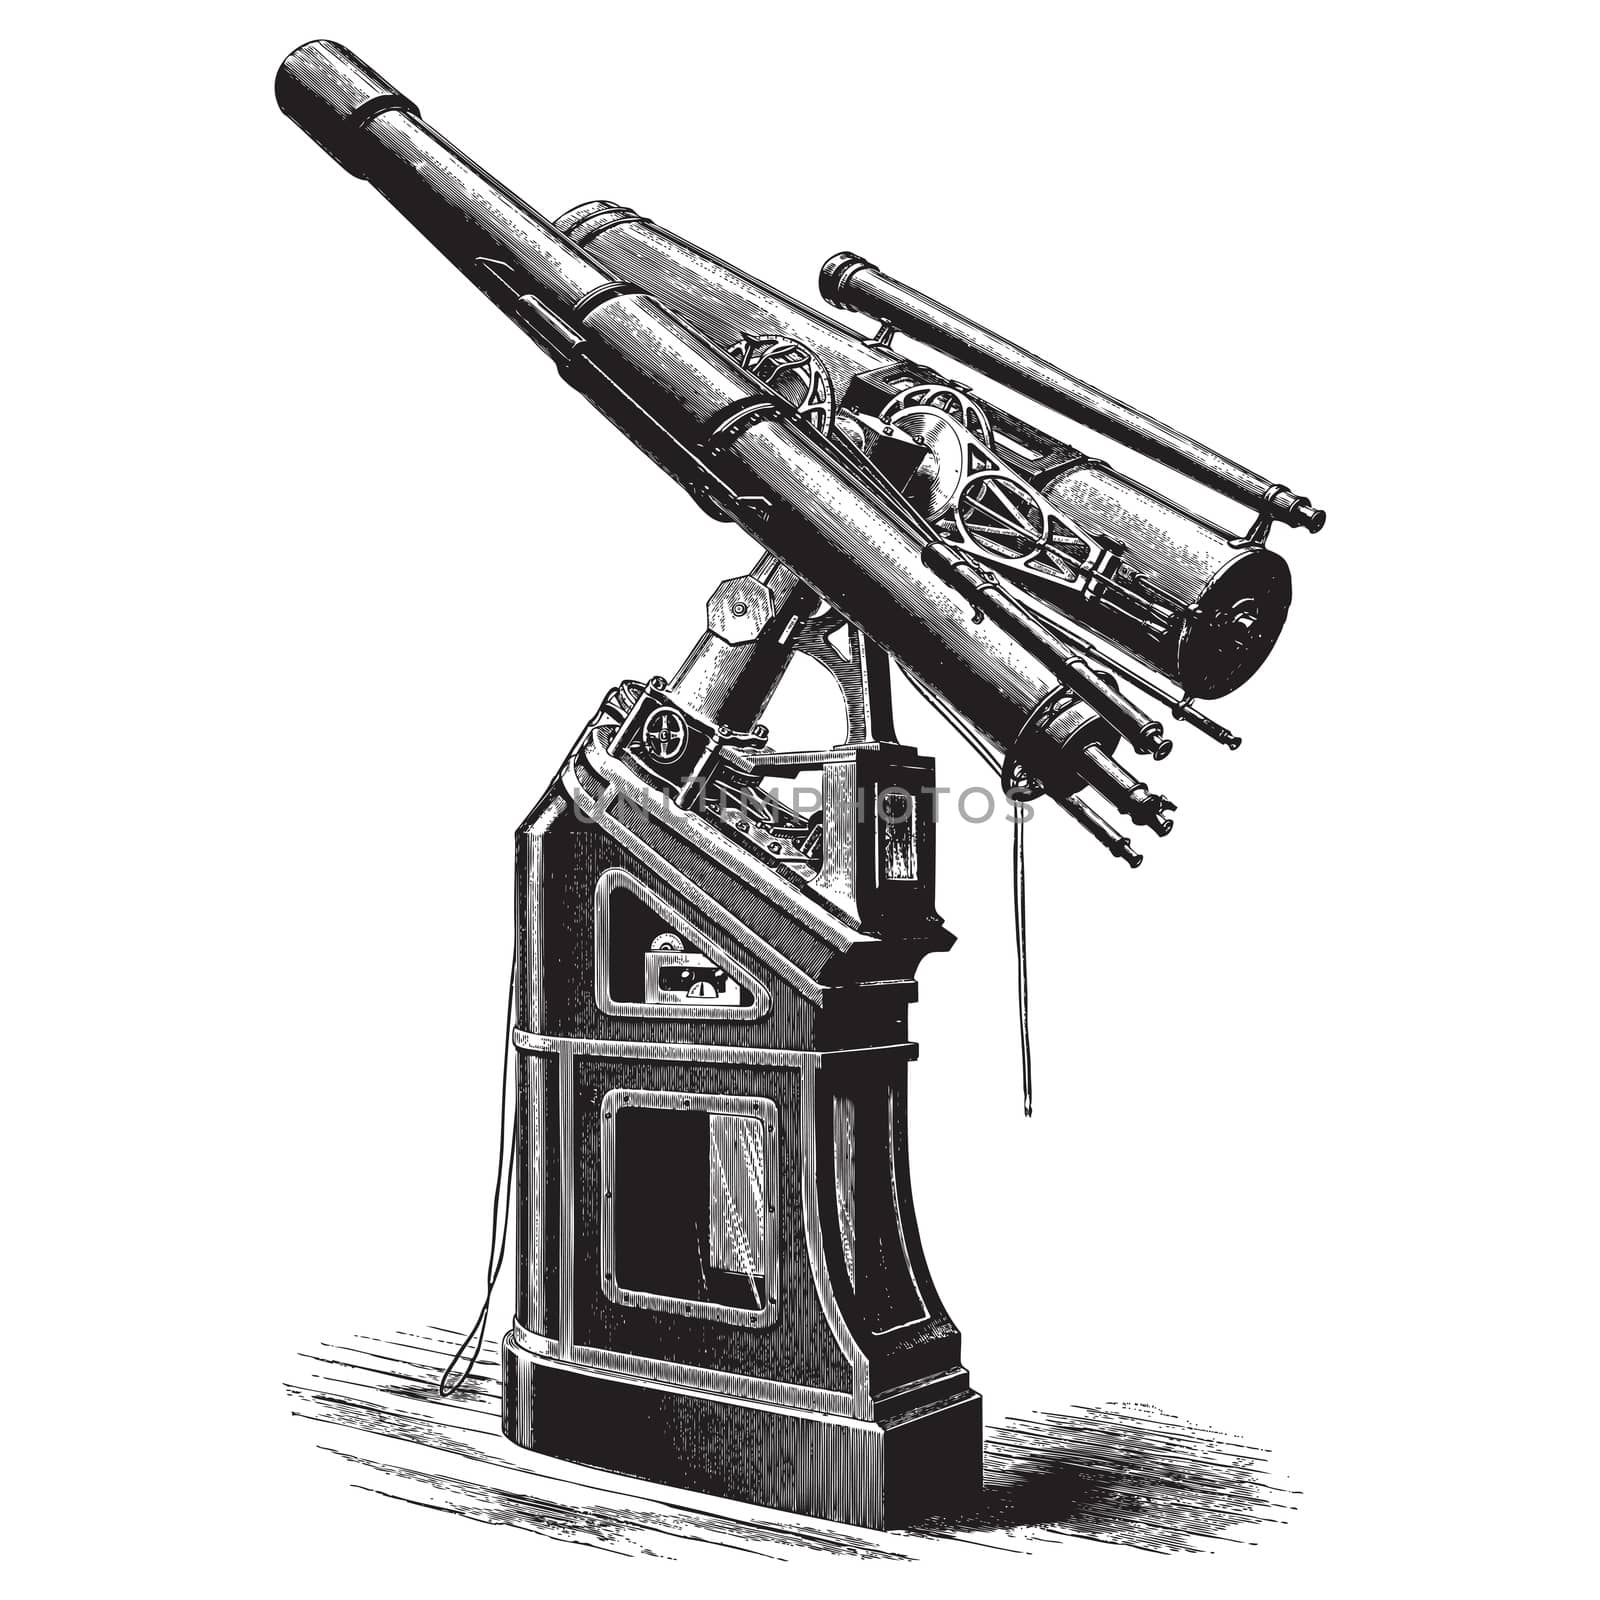 Ancient style engraving of a large equatorial telescope